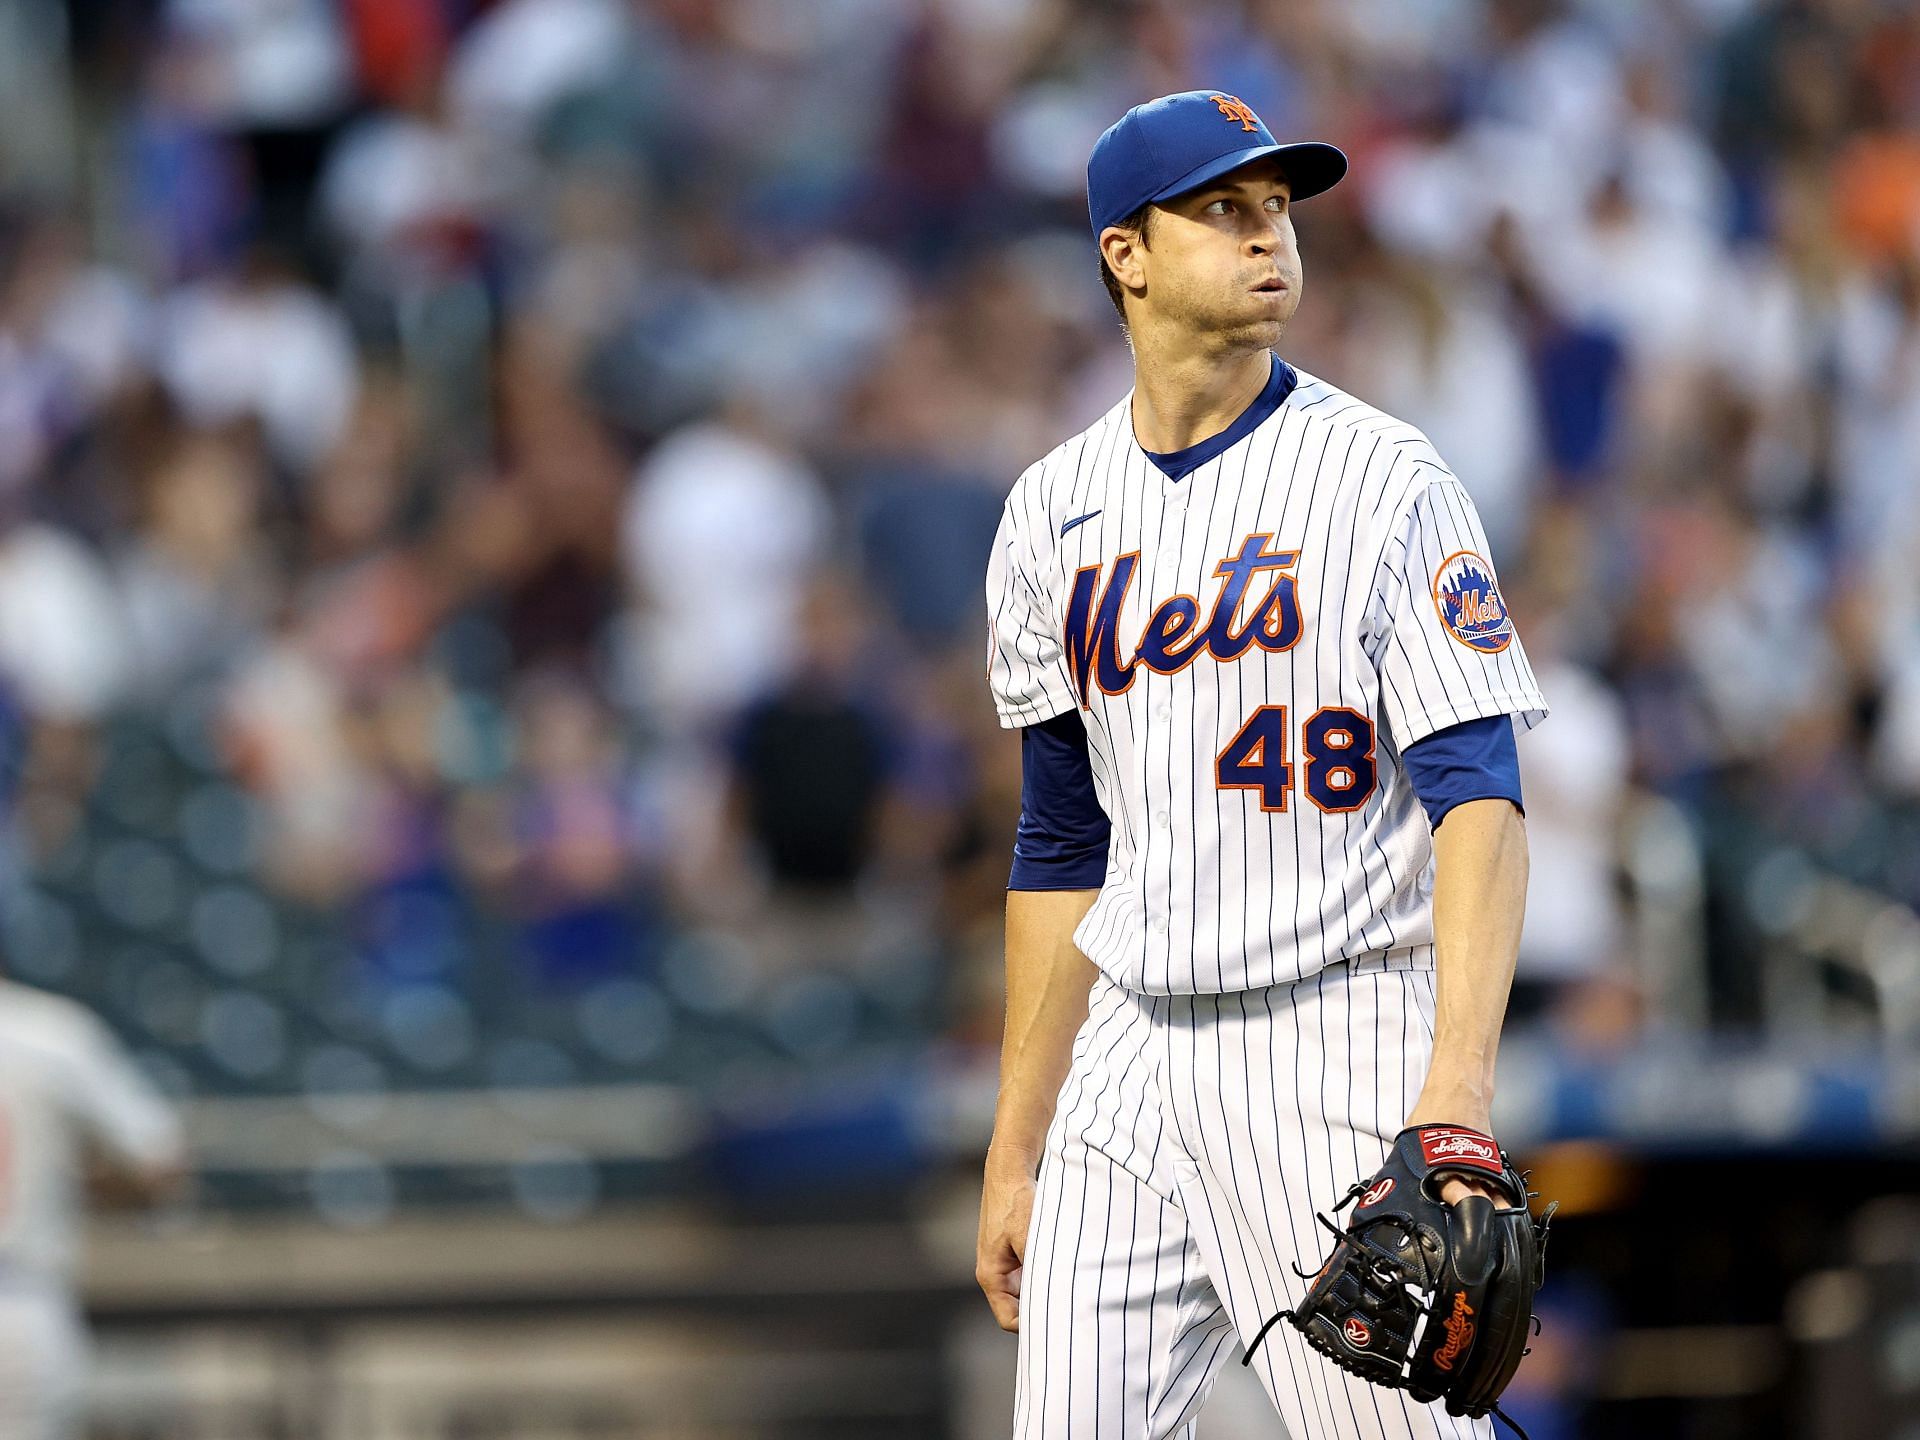 Mark Canha on Jacob deGrom: Jake told me he wants to come back